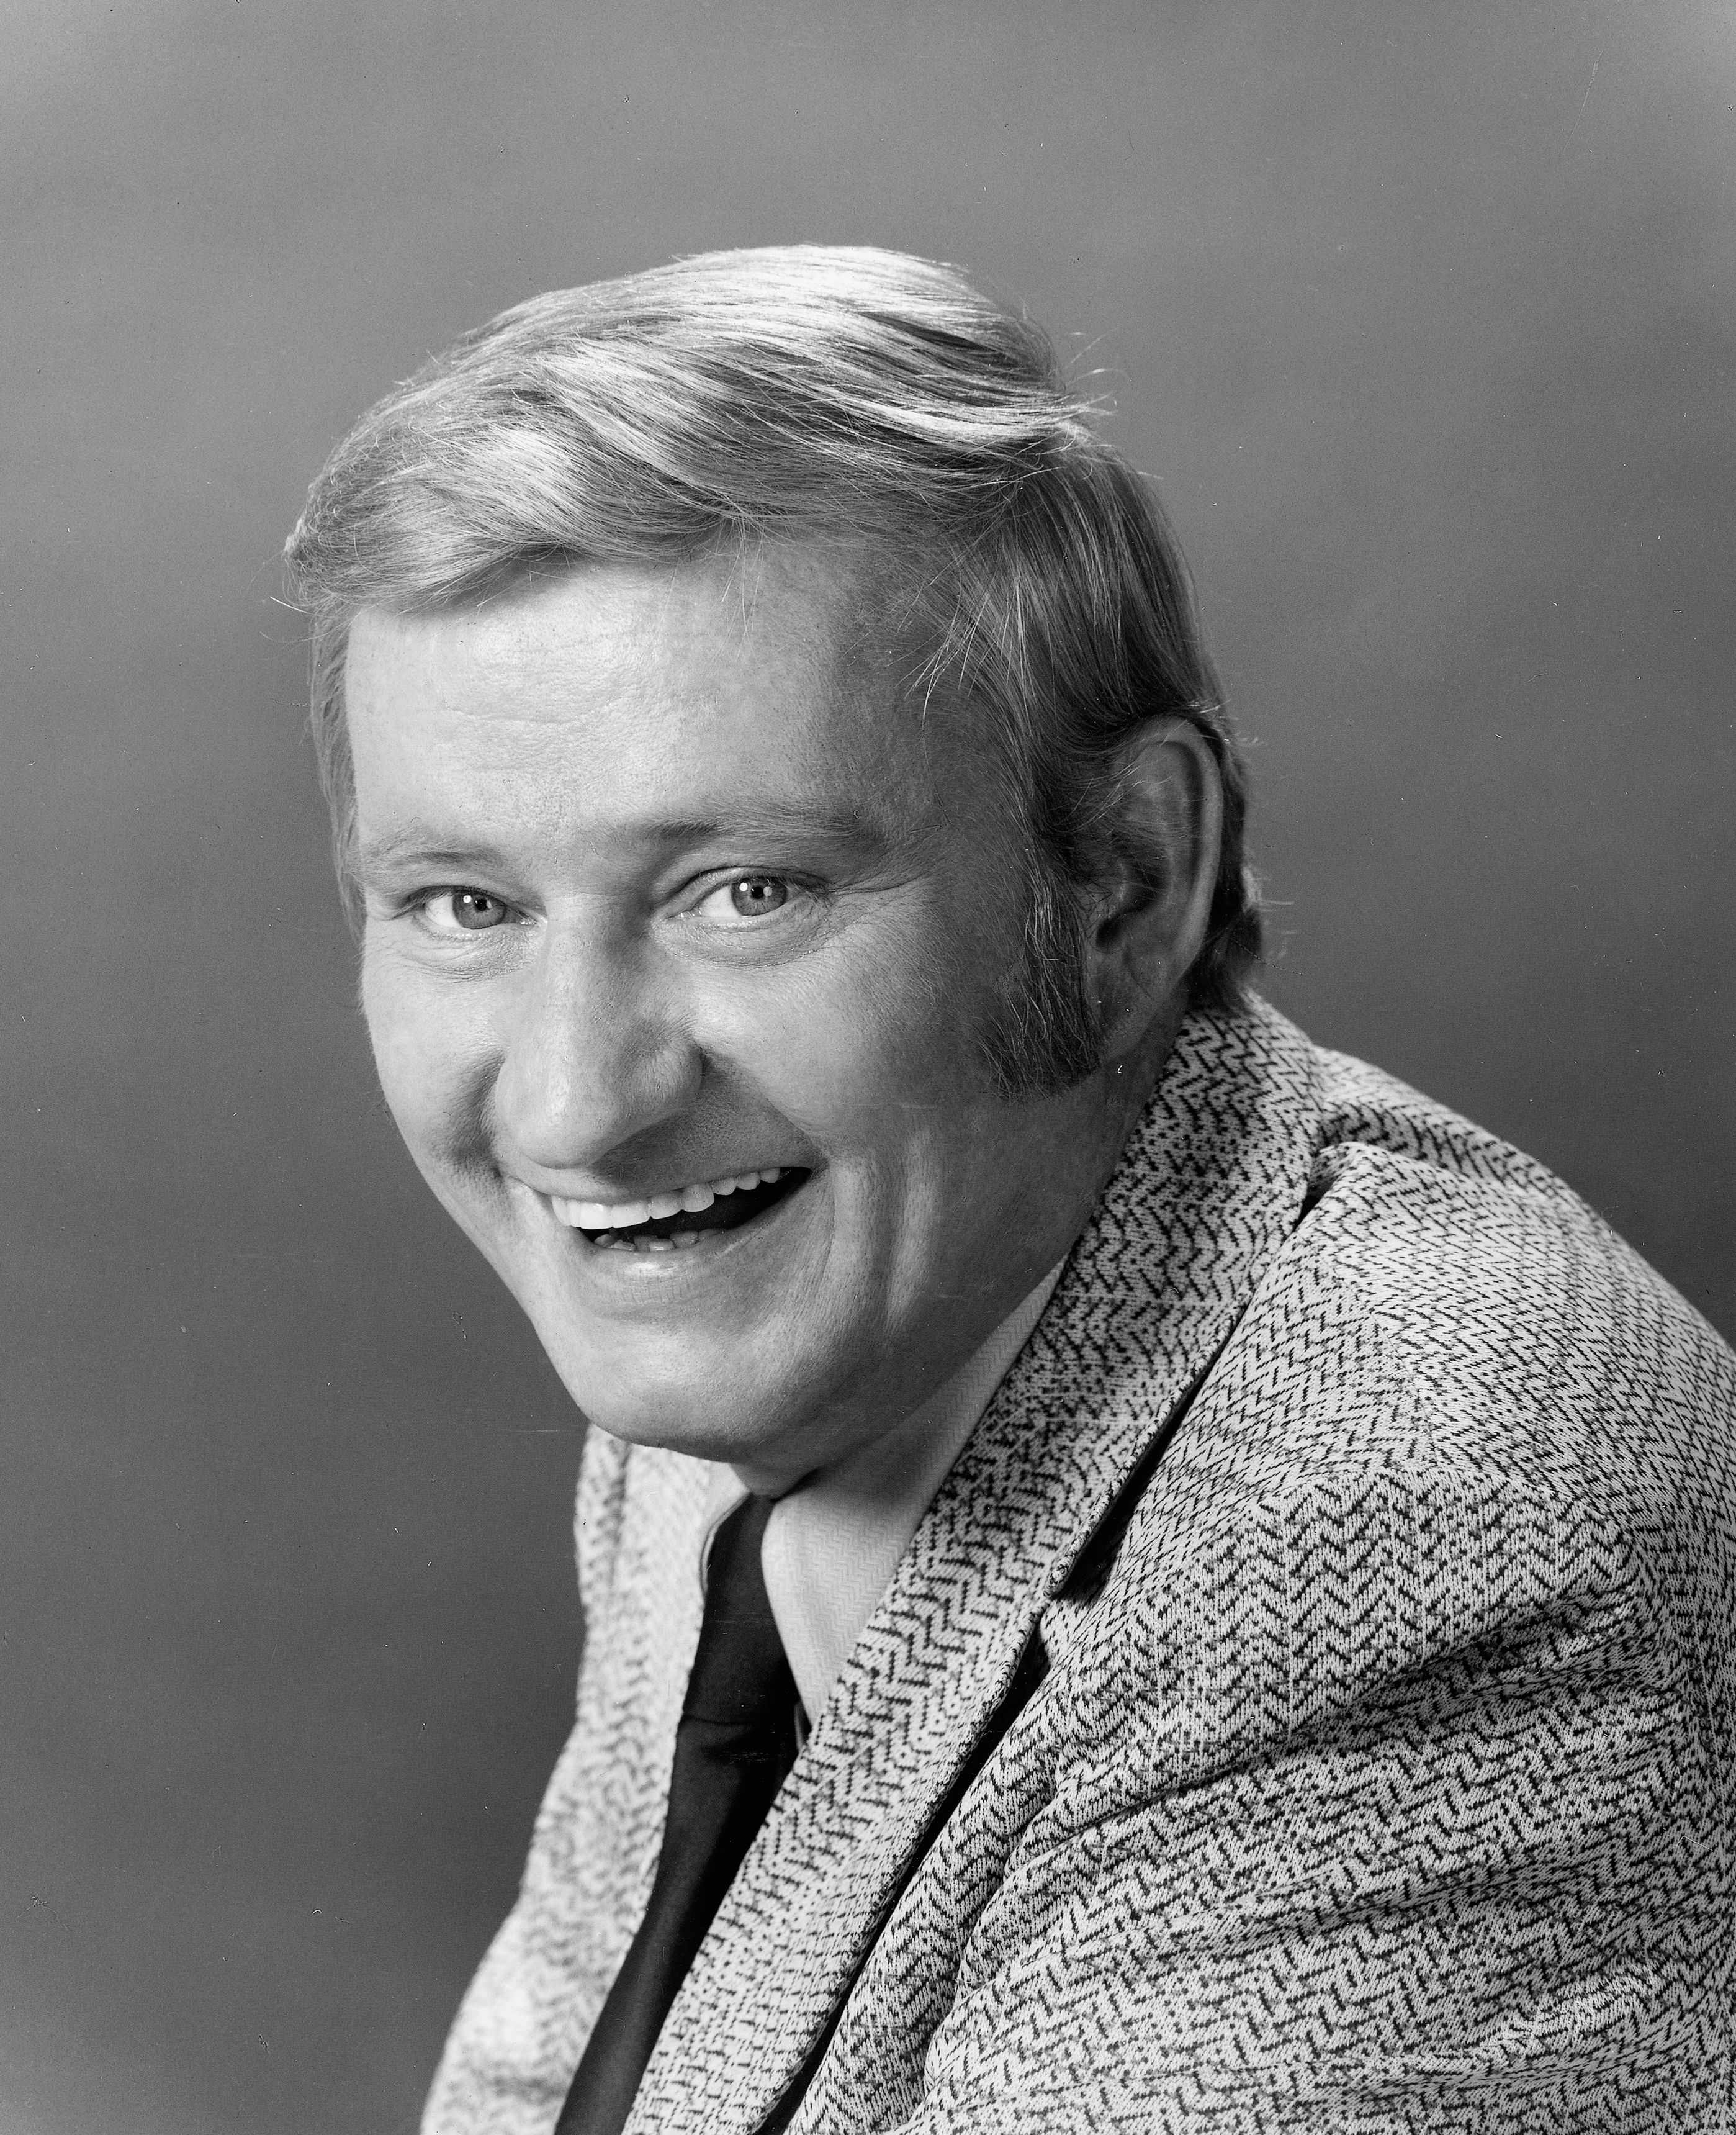 Photo of Dave Madden from "The Partridge Family" - Gallery (1972). | Photo: Getty Images